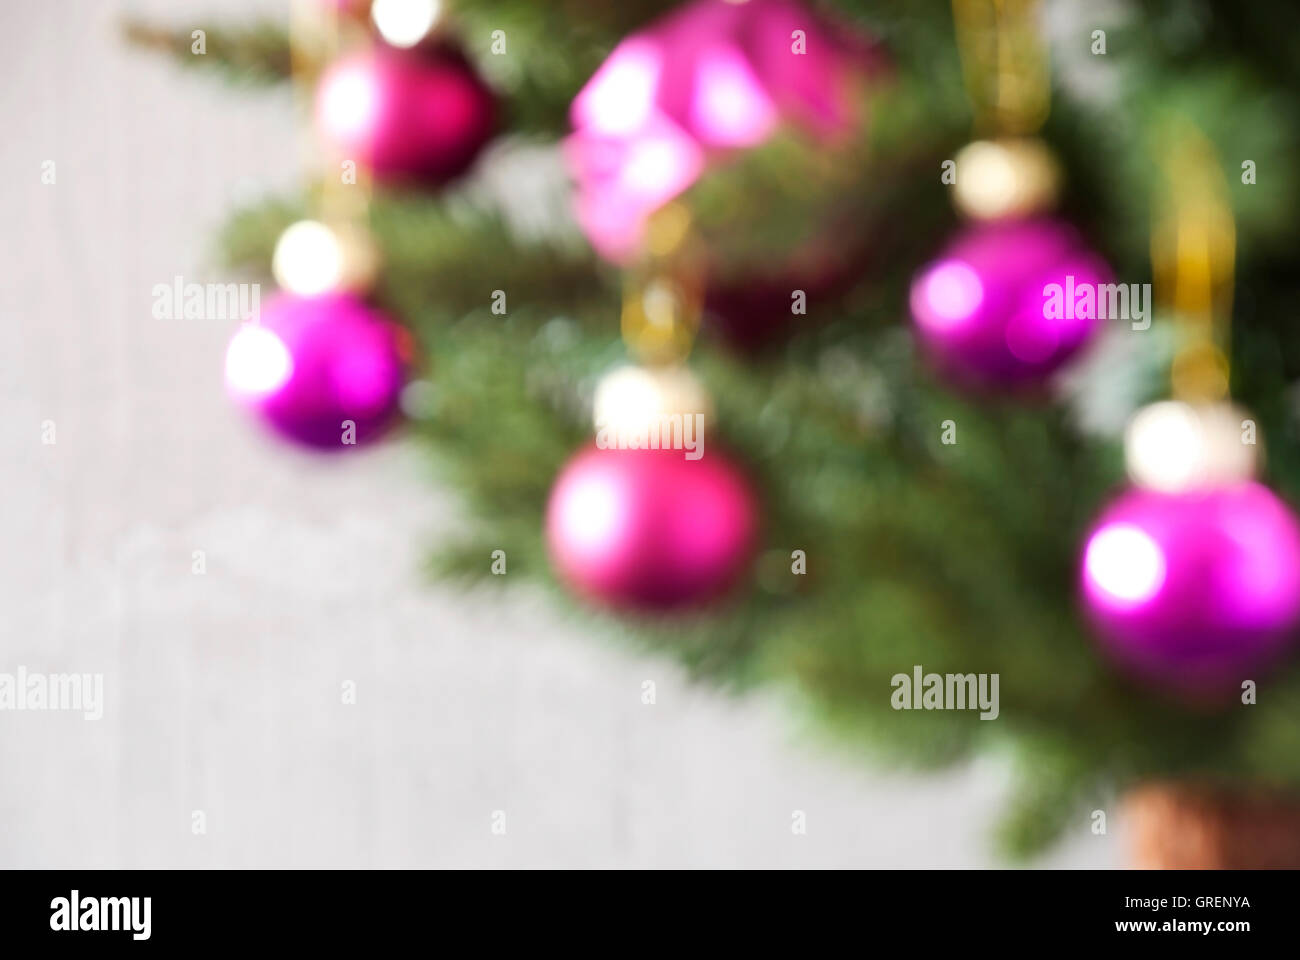 Blurry Balls Which Are Rose Quartz Colored, Christmas Tree Stock Photo